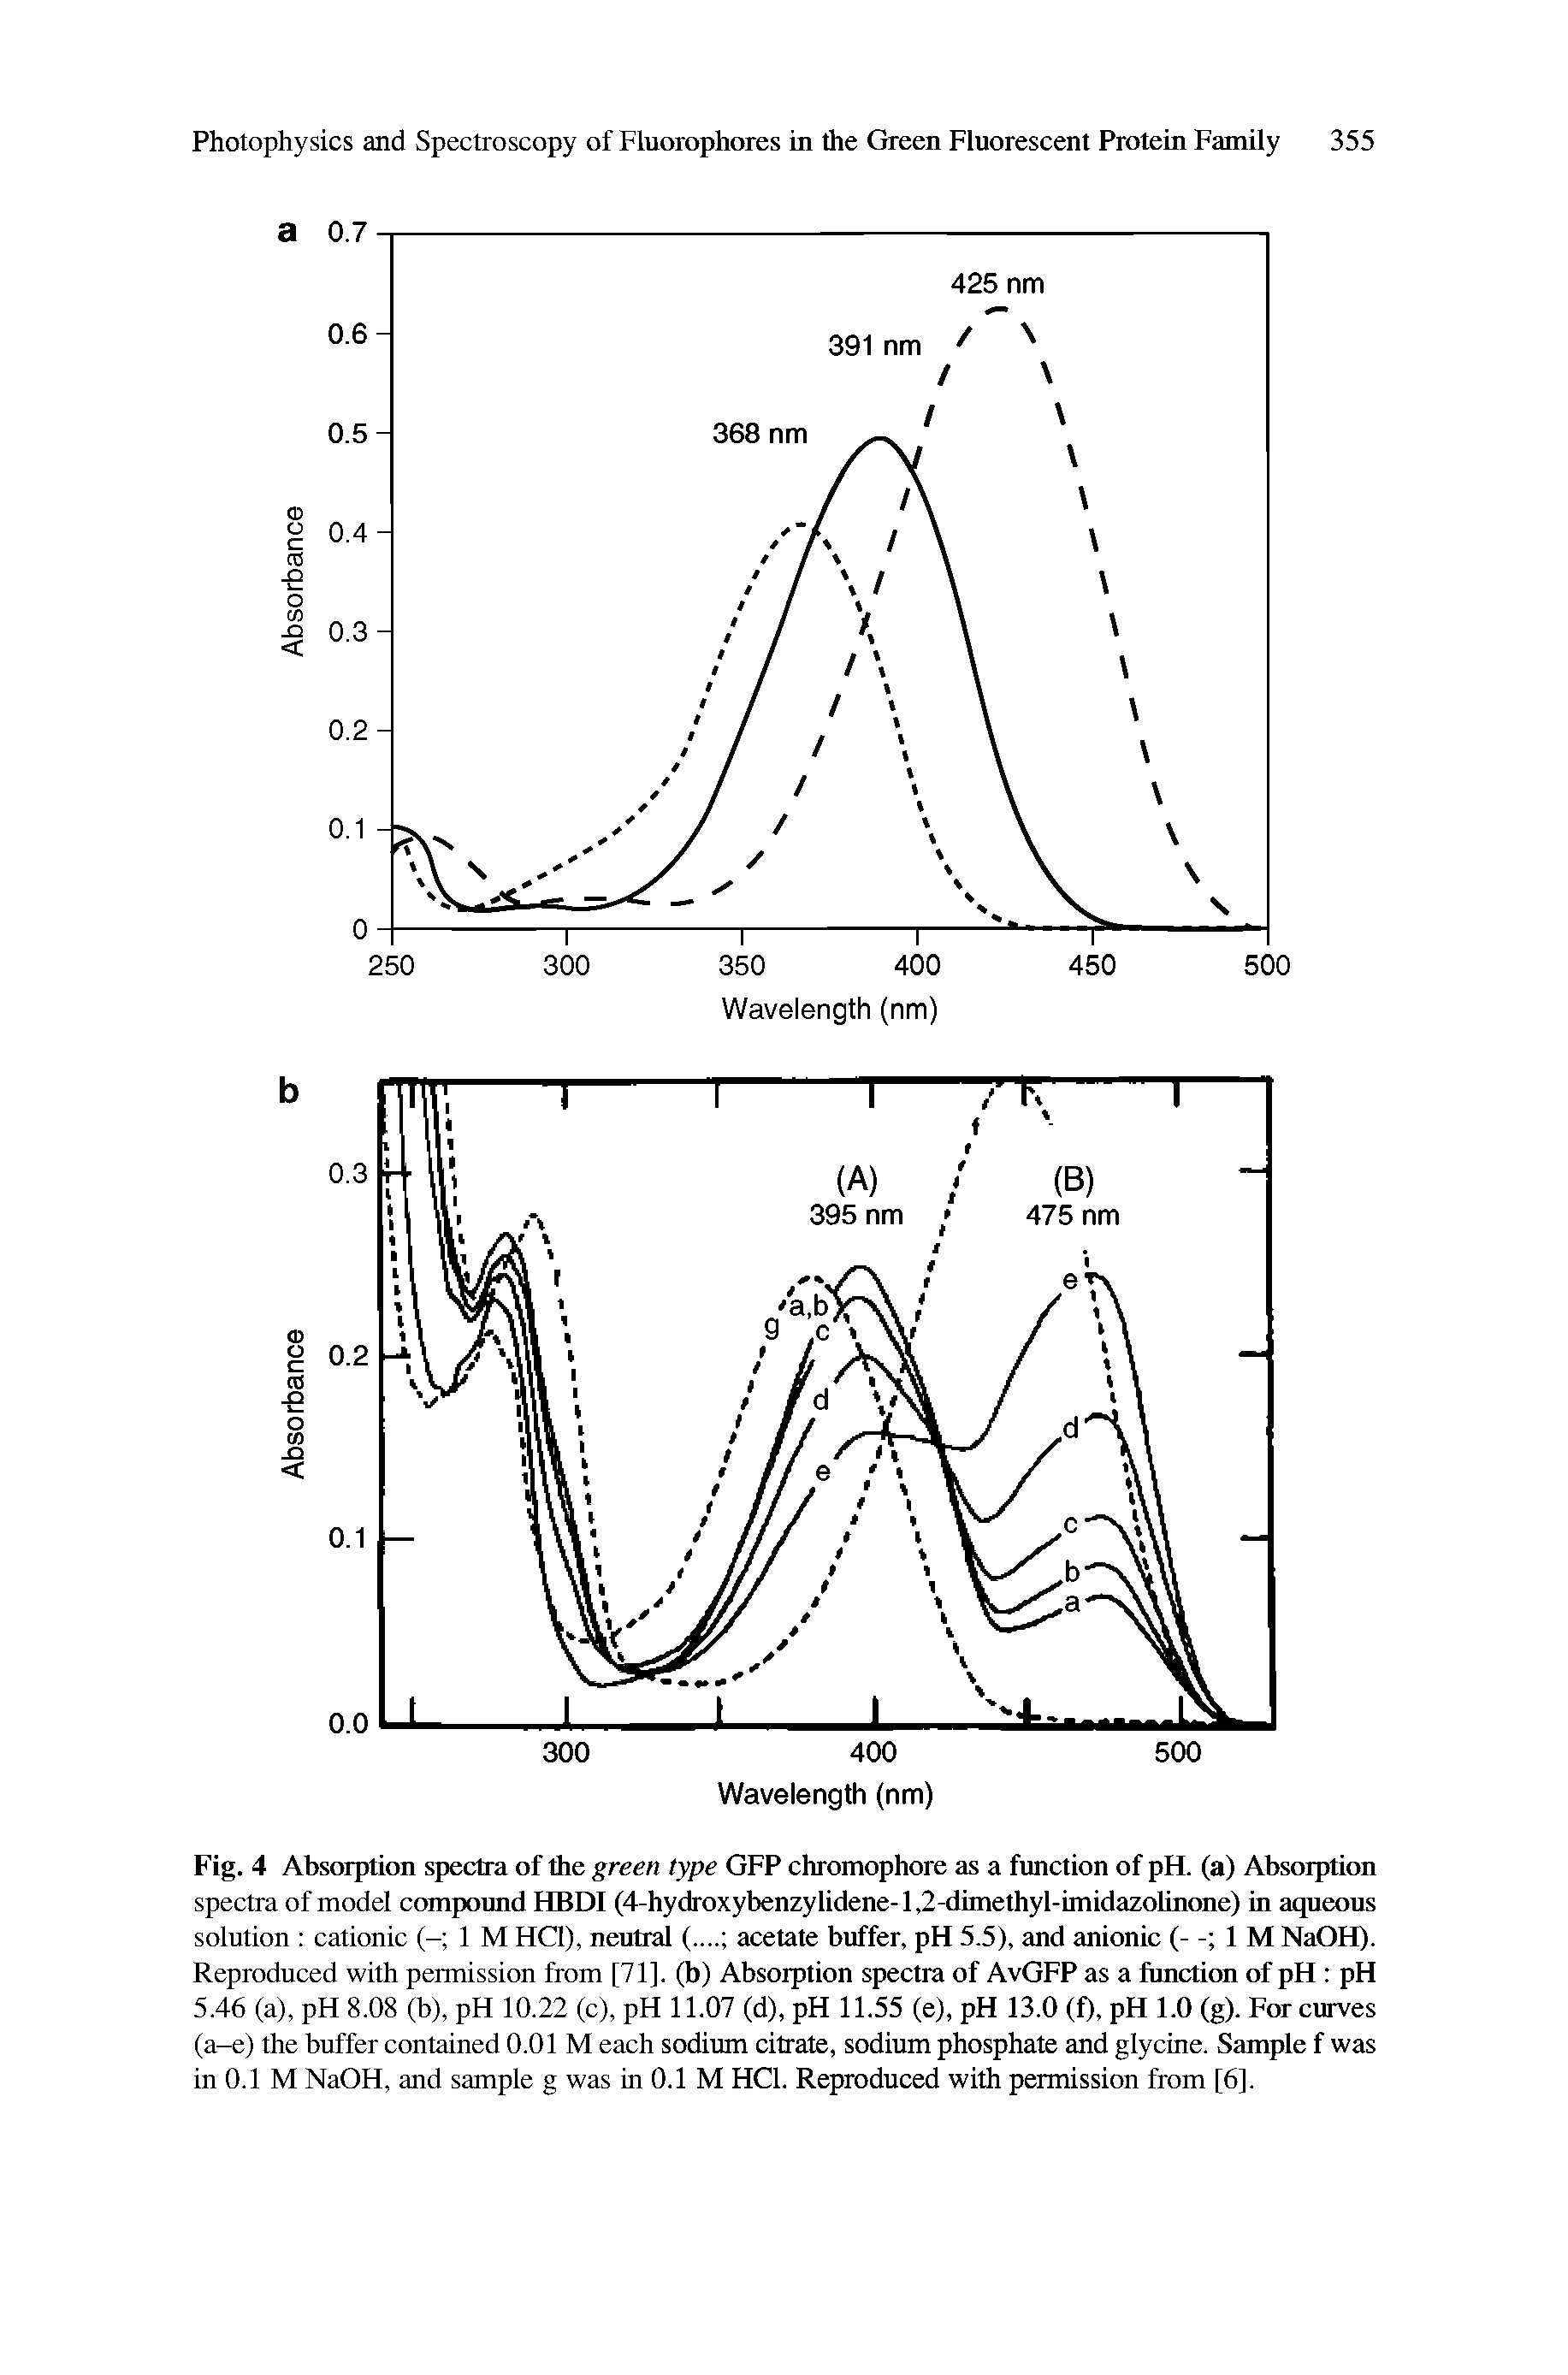 Fig. 4 Absorption spectra of the green type GFP chromophore as a function of pH. (a) Absorption spectra of model compound FIBDI (4-hydroxybenzy lidene-1,2-dimethyl-imidazolinone) in aqueous solution cationic (- 1 M HC1), neutral acetate buffer, pH 5.5), and anionic 1 M NaOFI). Reproduced with permission from [71]. (b) Absorption spectra of AvGFP as a function of pH pH 5.46 (a), pH 8.08 (b), pH 10.22 (c), pH 11.07 (d), pH 11.55 (e), pH 13.0 (f), pH 1.0 (g). For curves (a-e) the buffer contained 0.01 M each sodium citrate, sodium phosphate and glycine. Sample f was in 0.1 M NaOH, and sample g was in 0.1 M HC1. Reproduced with permission from [6],...